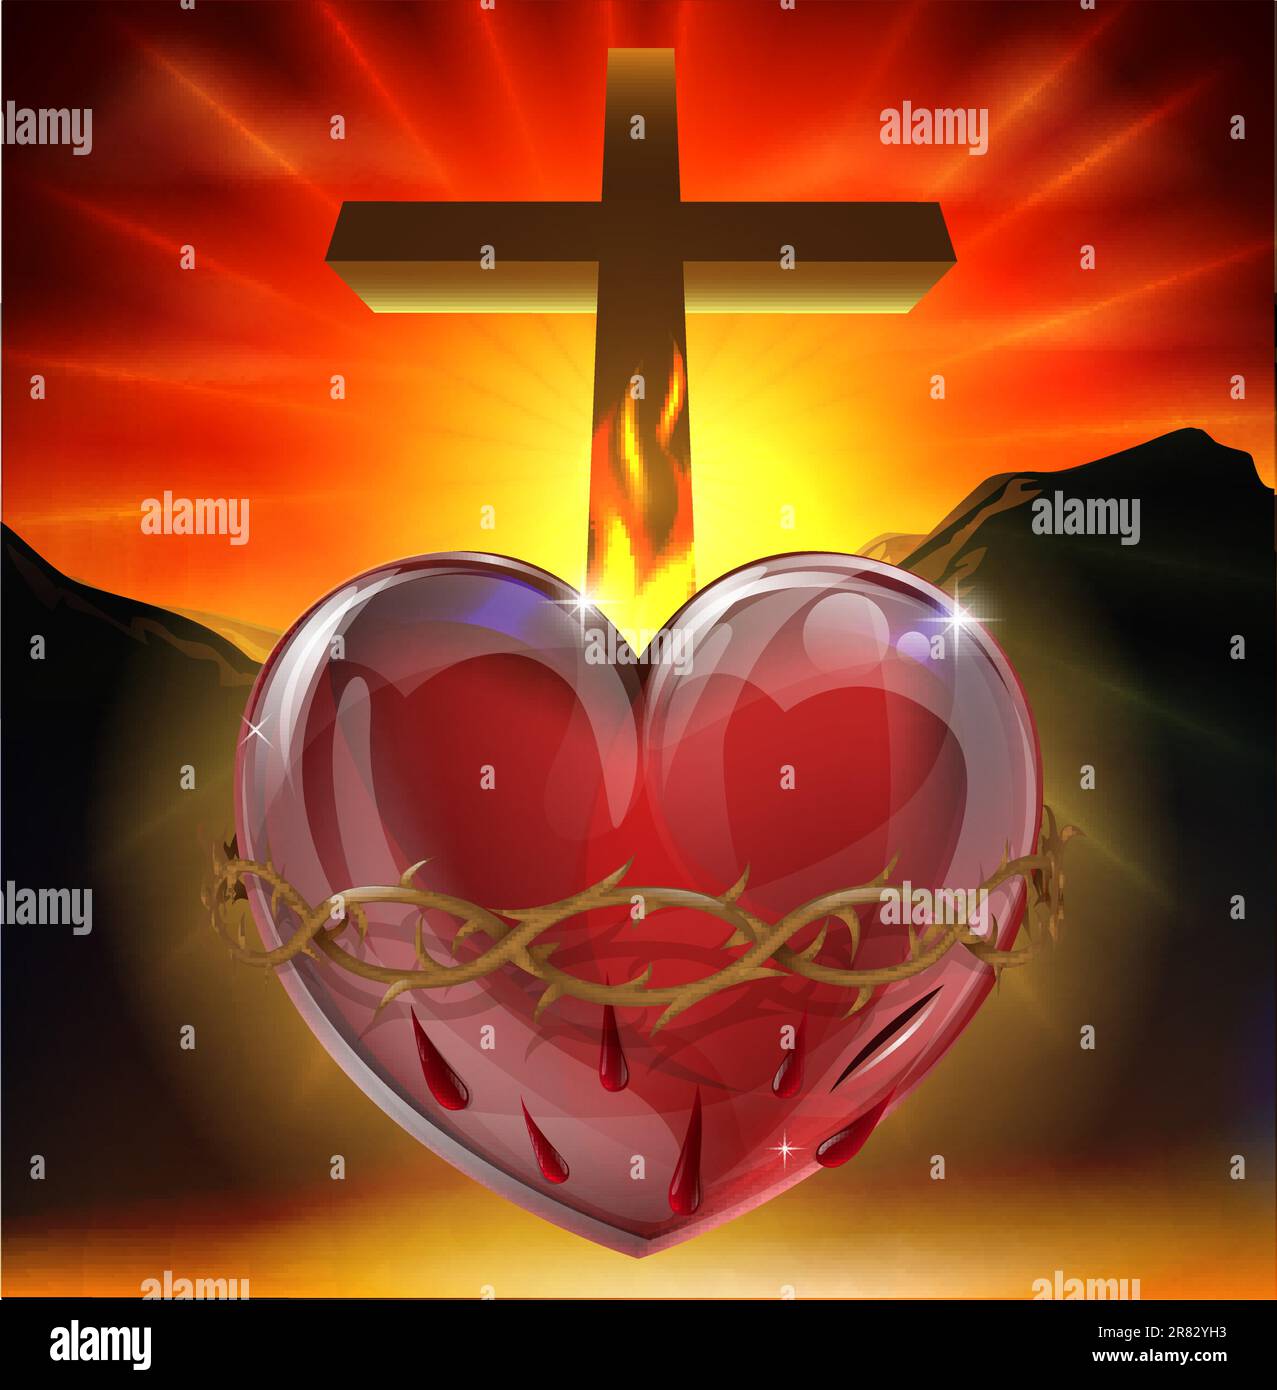 Illustration of the Christian symbol of the sacred heart. A heart shining with divine light with crown of thorns,  lance wound and flame representi... Stock Vector